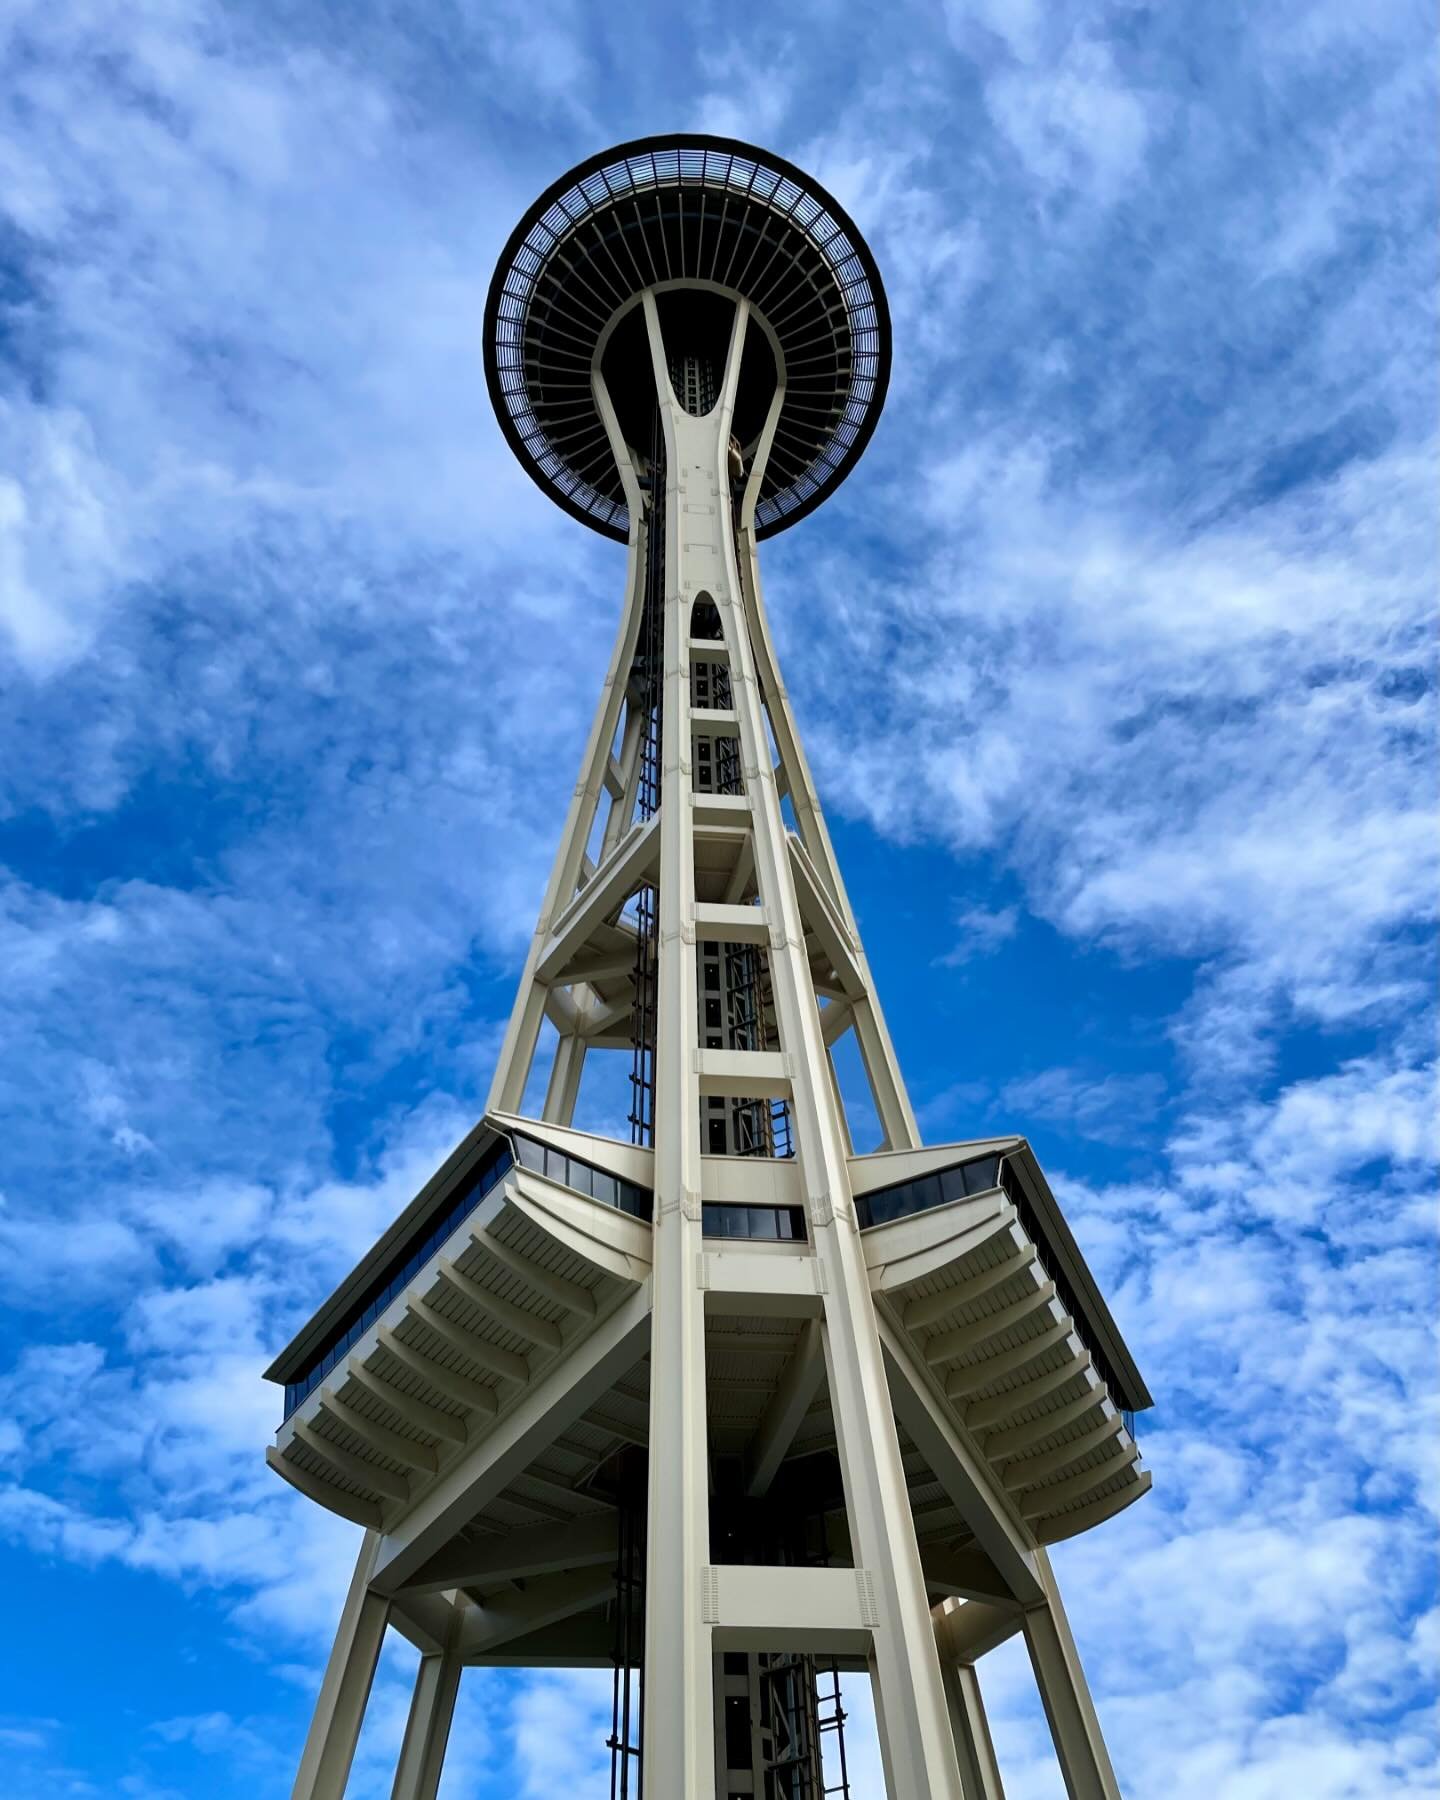 The Seattle Space Needle was built for the 1962 World&rsquo;s Fair and at 605 ft (184 m) high, was once the tallest structure west of the Mississippi River. The tower is 138 ft (42 m) wide, weighs 9,550 short tons (8,660 metric tons), and is built to